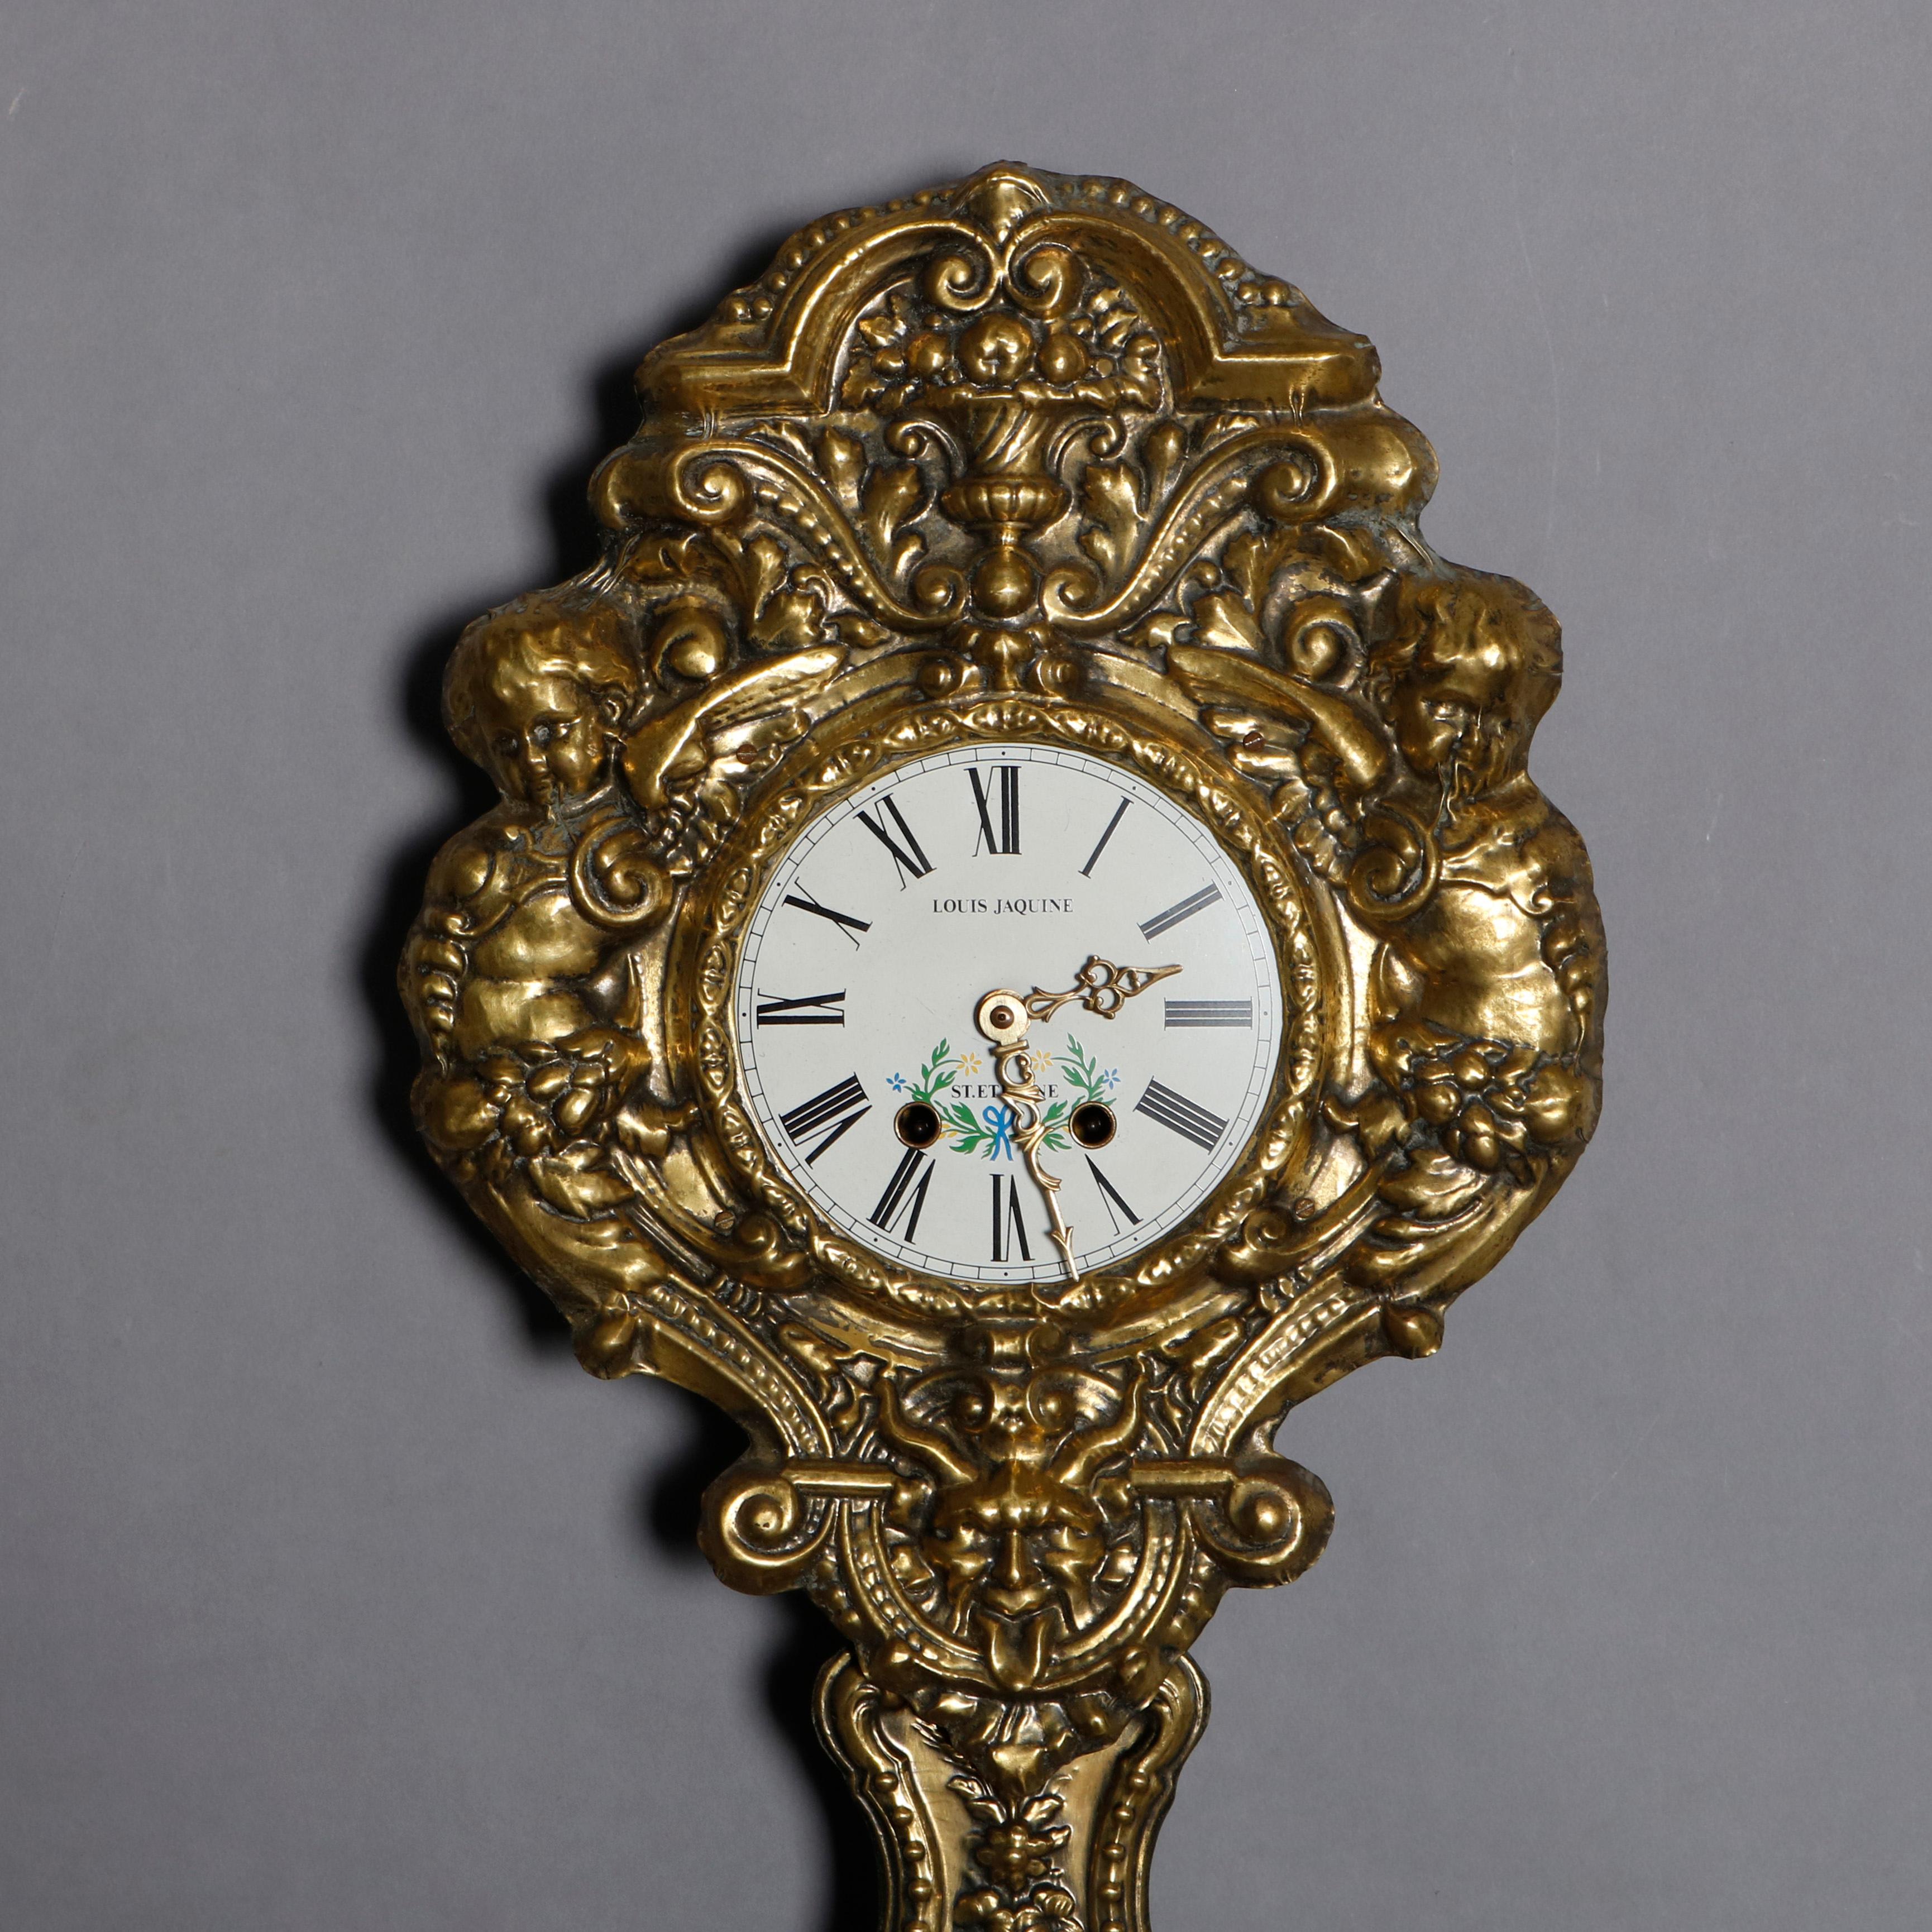 An antique French Rococo Comtoise, Wag-on-Wall, clock offers brass relief case and pendulum with upper having urn and foliate decoration surmounting enameled face with Roman numerals and signed Louis Jaquin, St Etienne, flanking figural cherubs and